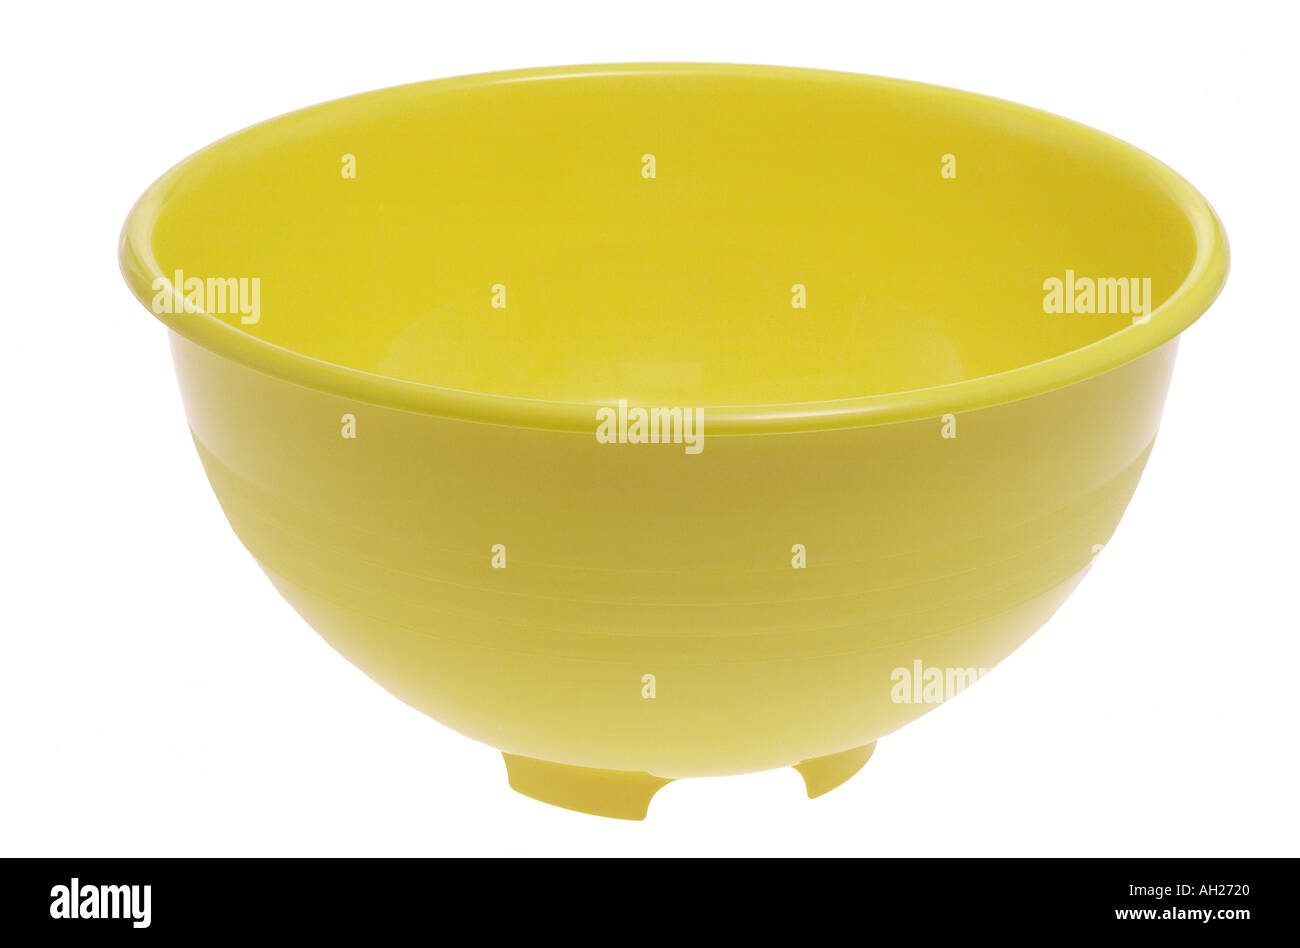 Yellow plastic mixing bowl silhouetted on a white background Stock Photo